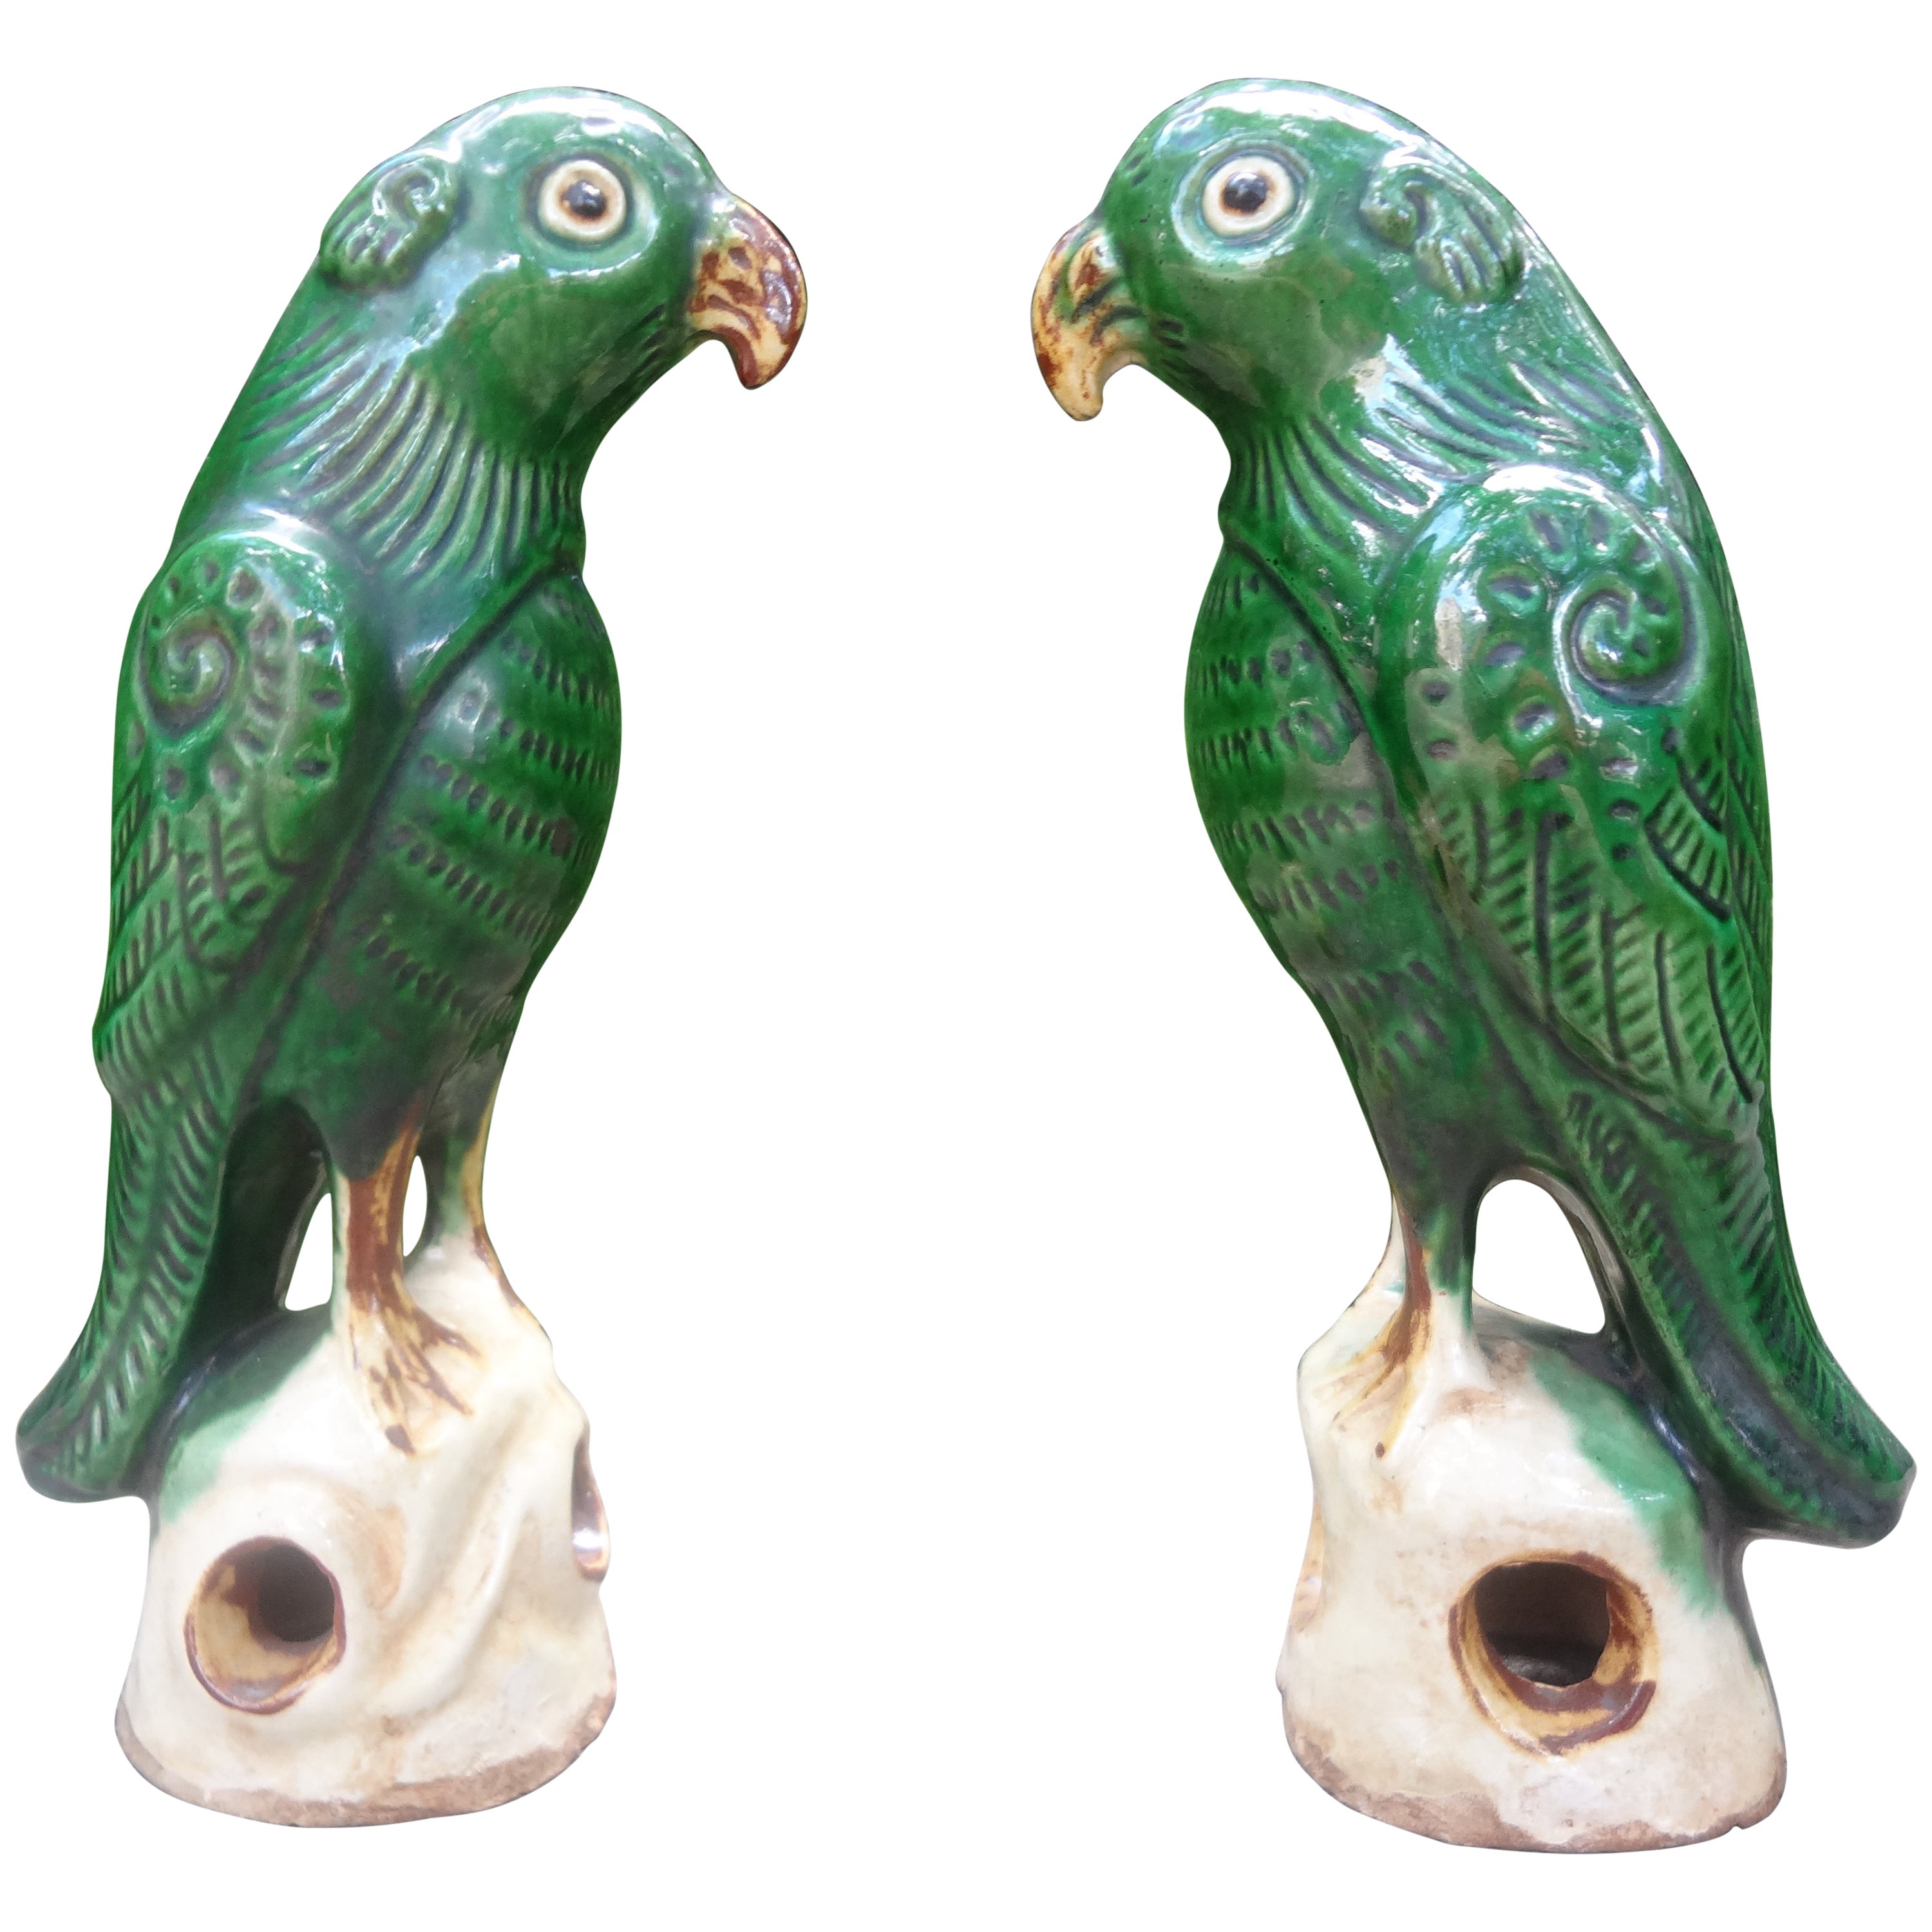 Pair of Antique Chinese Glazed Birds or Parrots